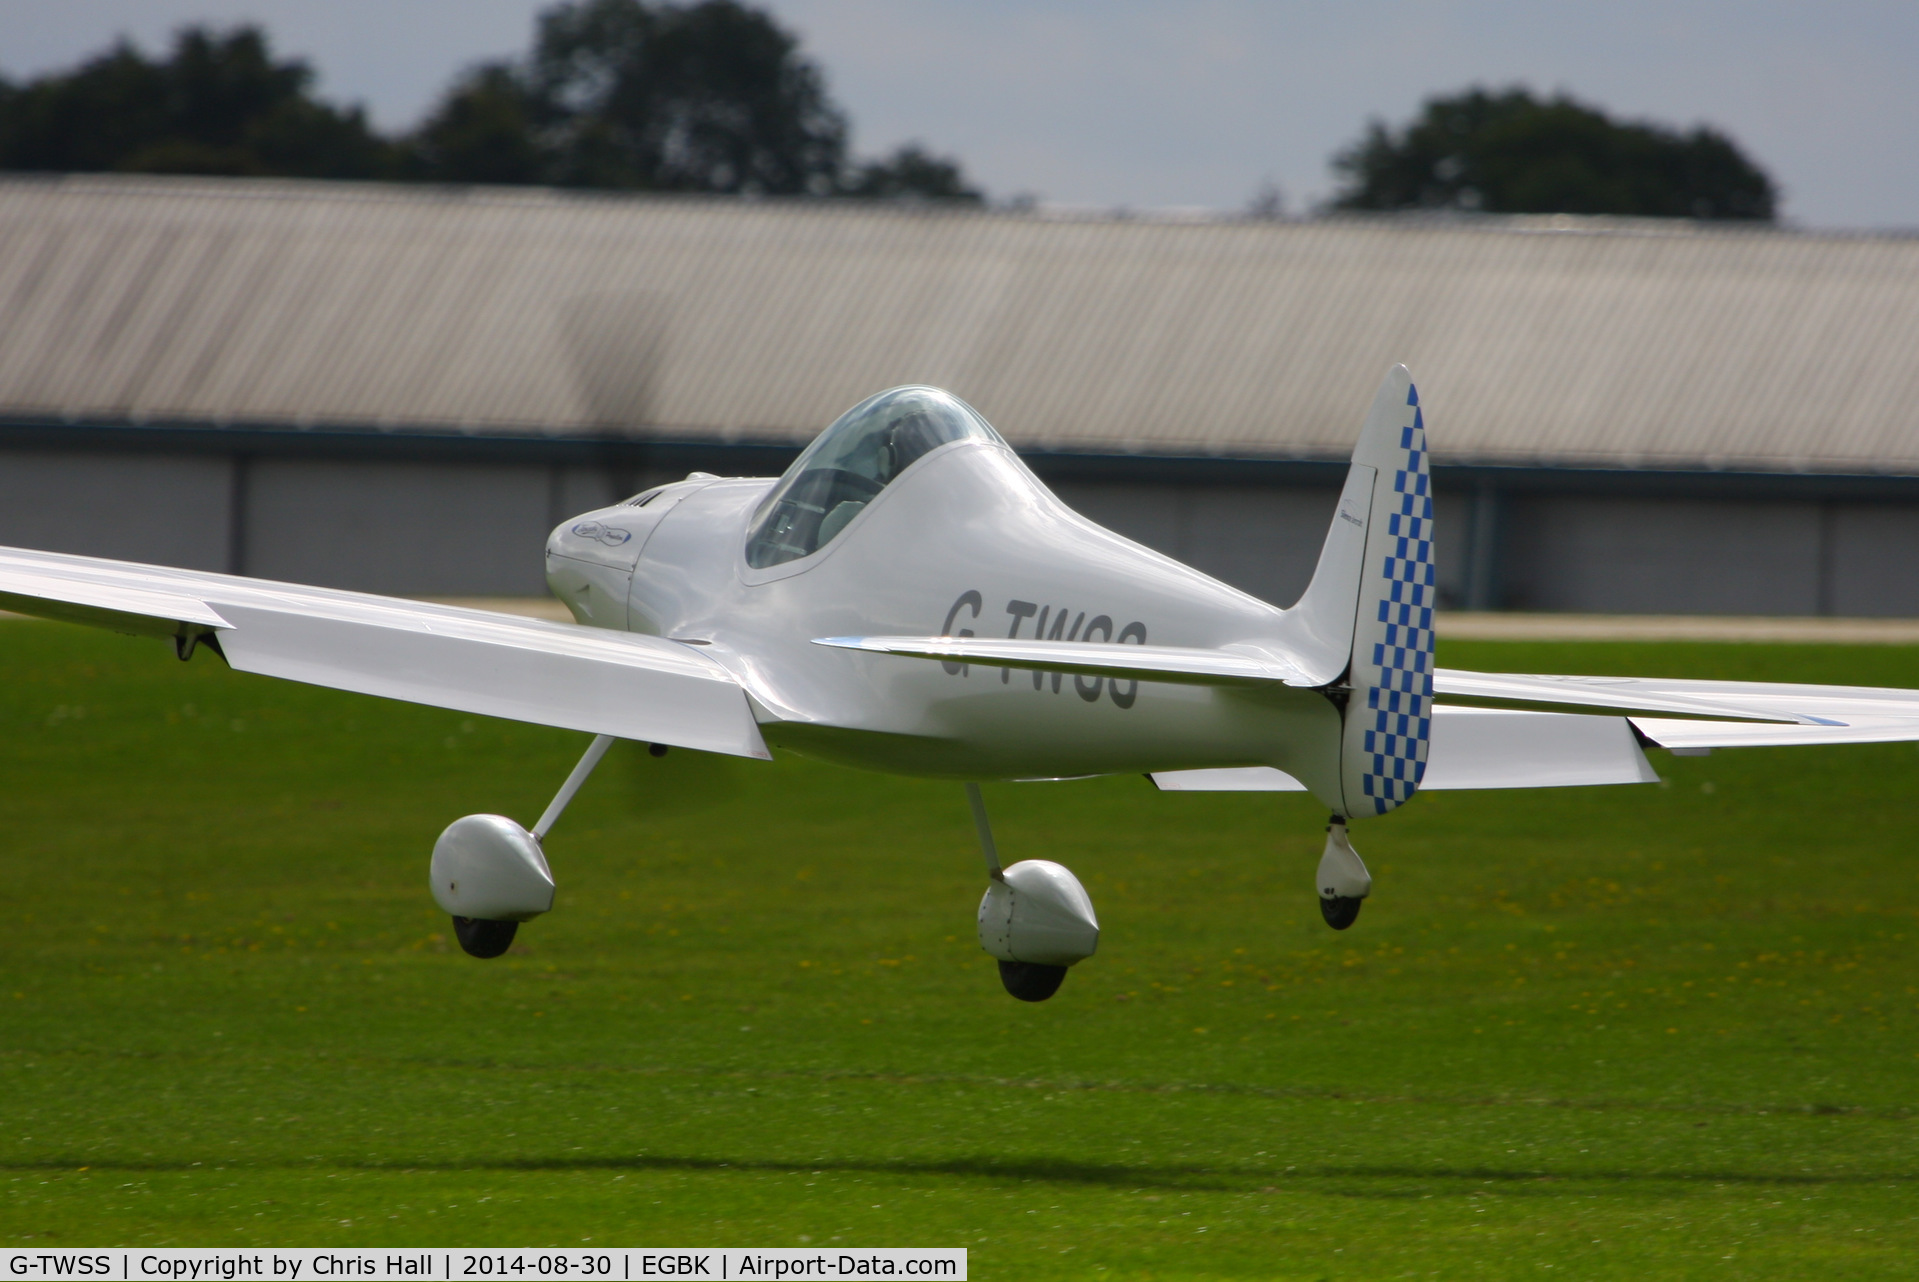 G-TWSS, 2008 Silence Twister C/N PFA 329-14608, at the LAA Rally 2014, Sywell